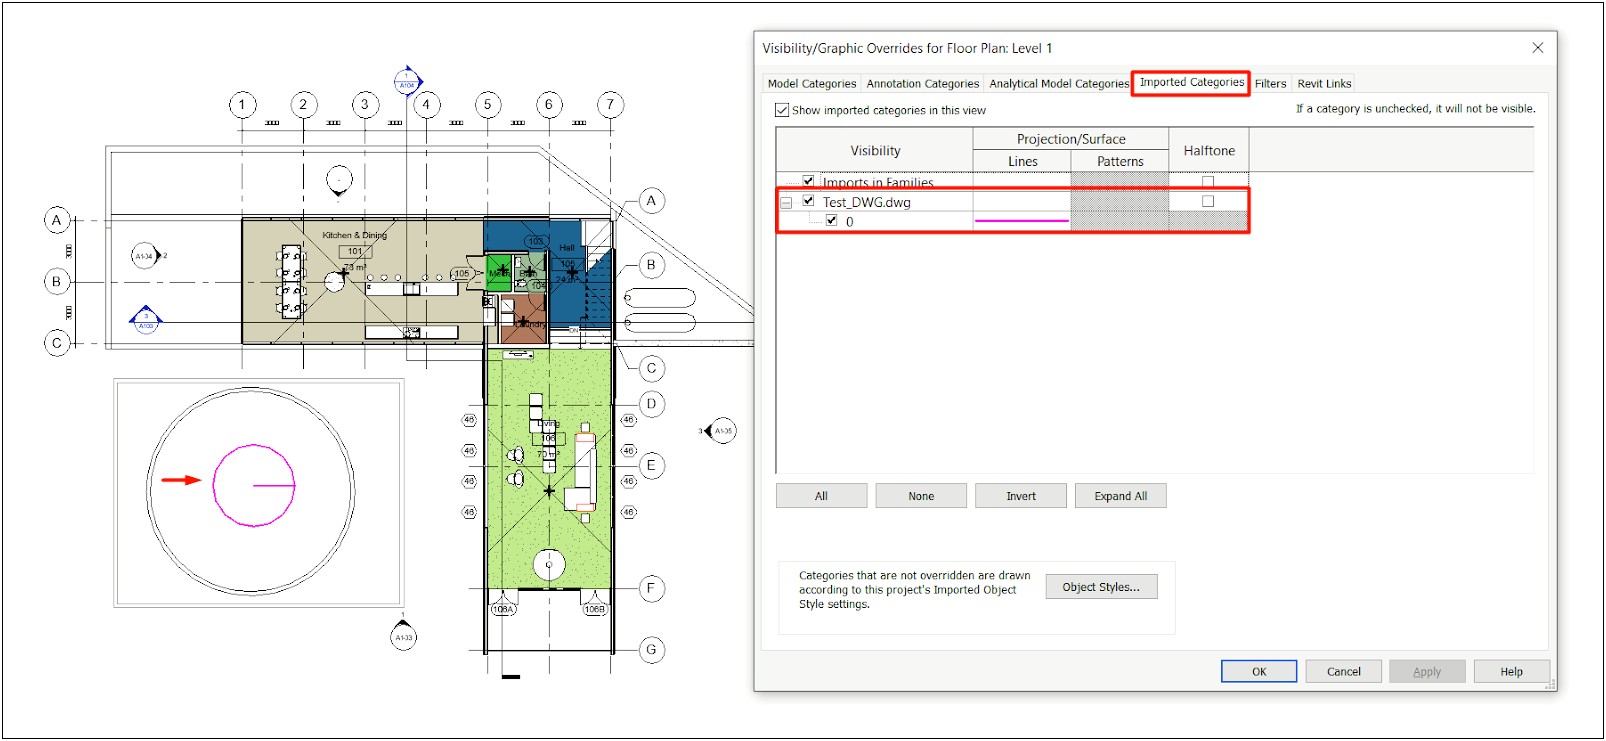 2019 Revit Default Residential Template Did Not Download